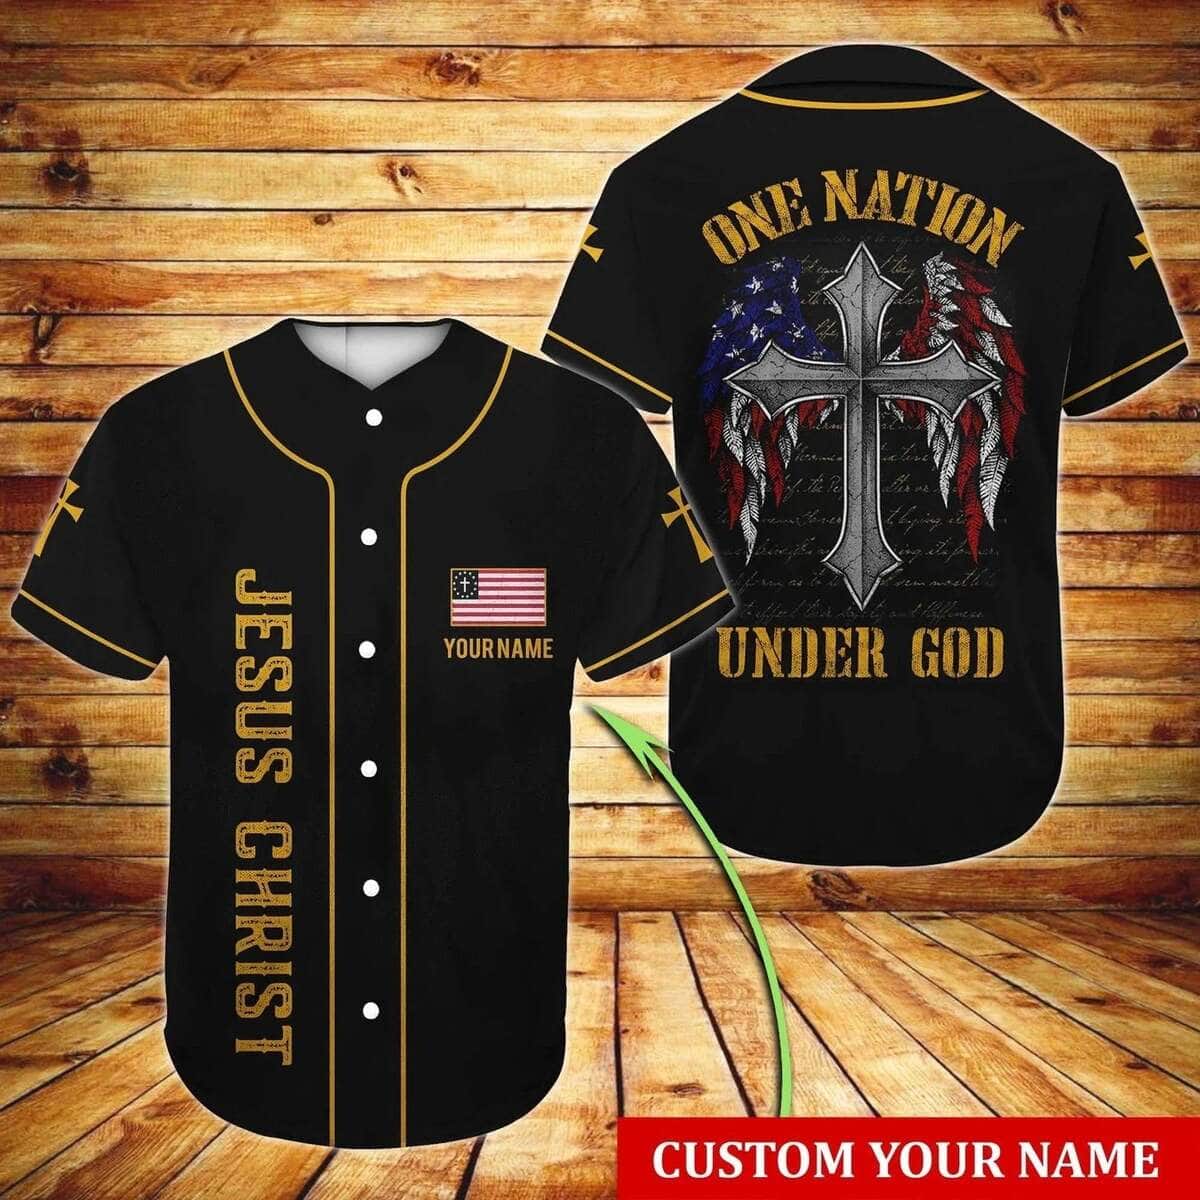 Customize Personalized Wings American Flag Cross One Nation Under God Baseball Jersey